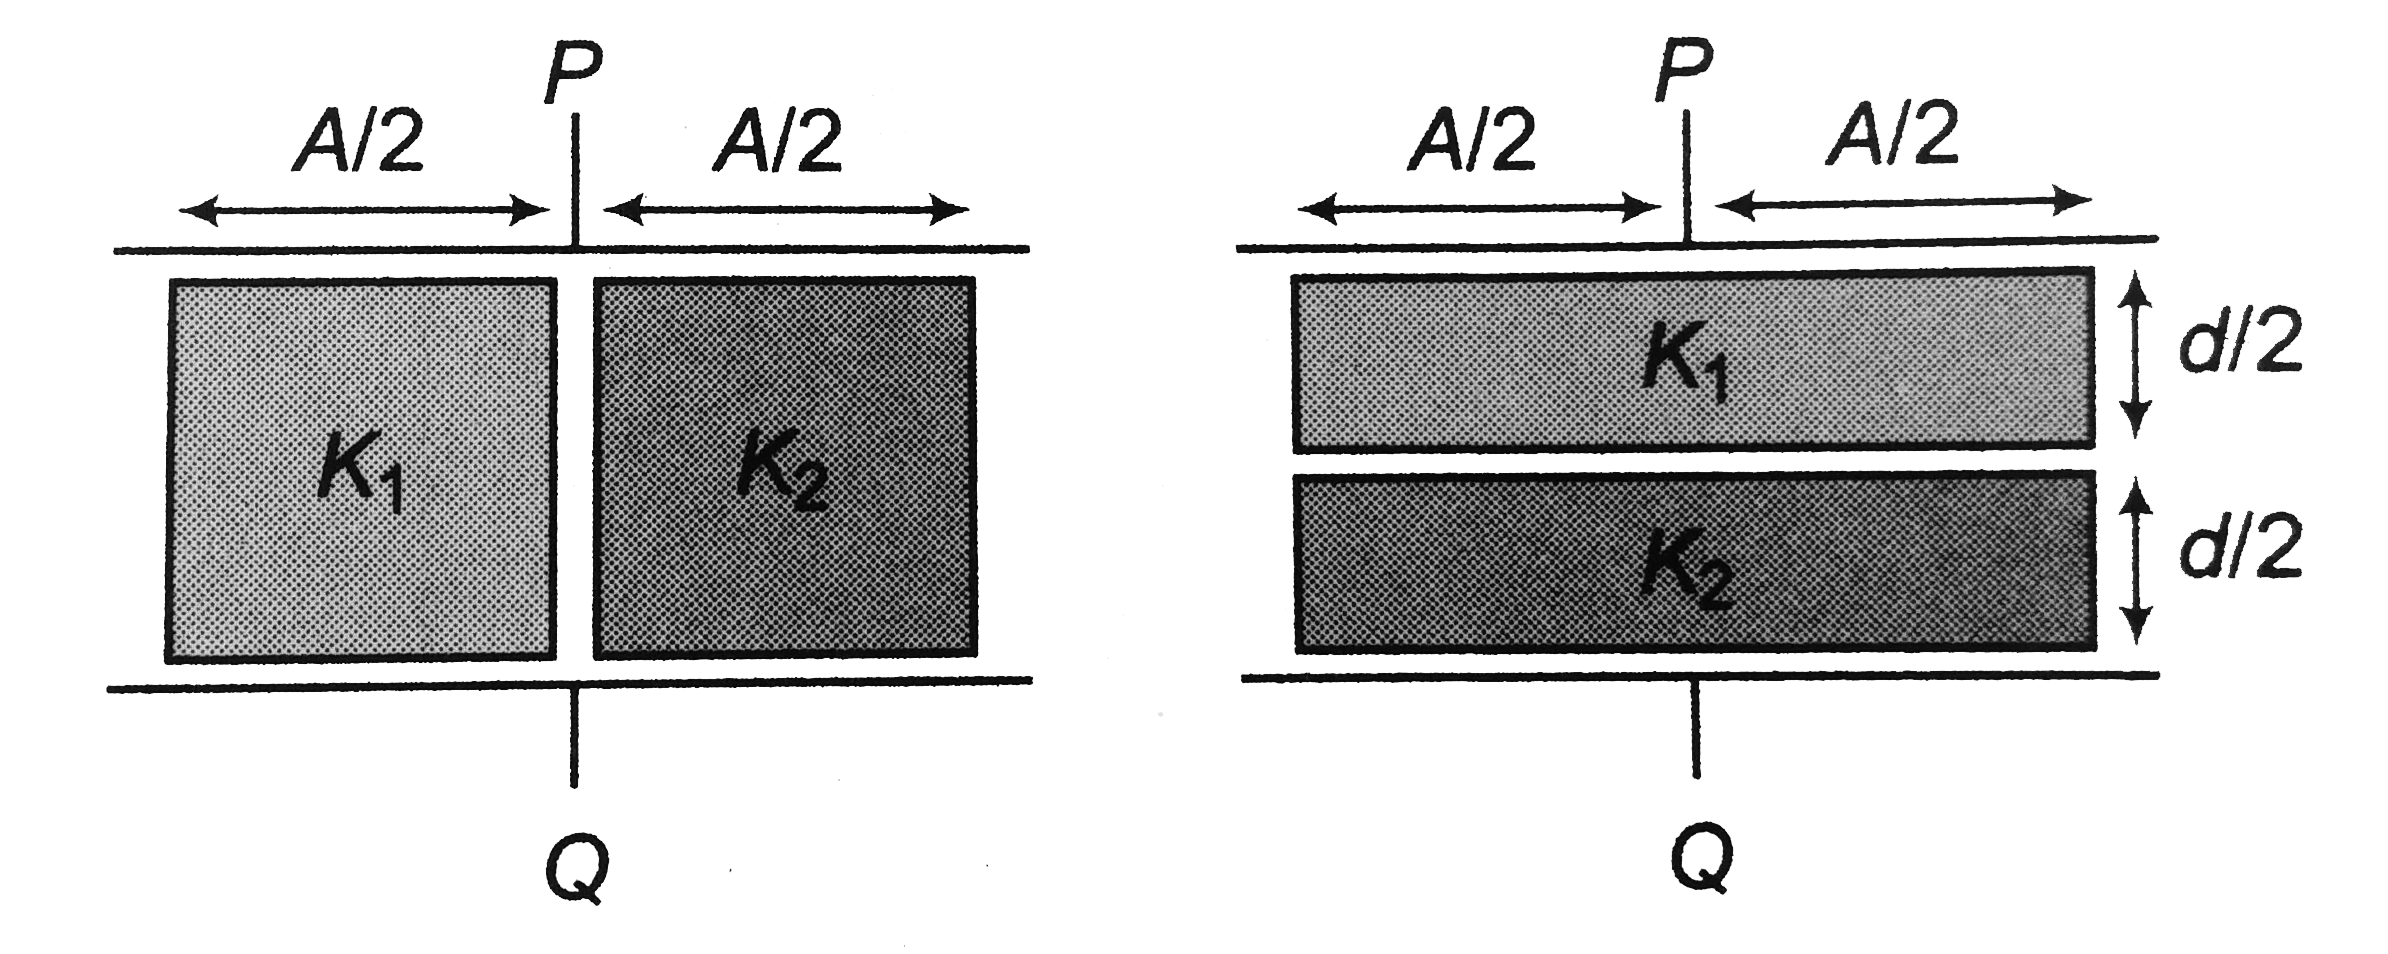 In the arrangement shown in figure dielectric constant K1=2 and K2=3. If the capacitance across P and Q are C1 and C2 respectively, then C1//C2 will be (the gaps shown are negligible)